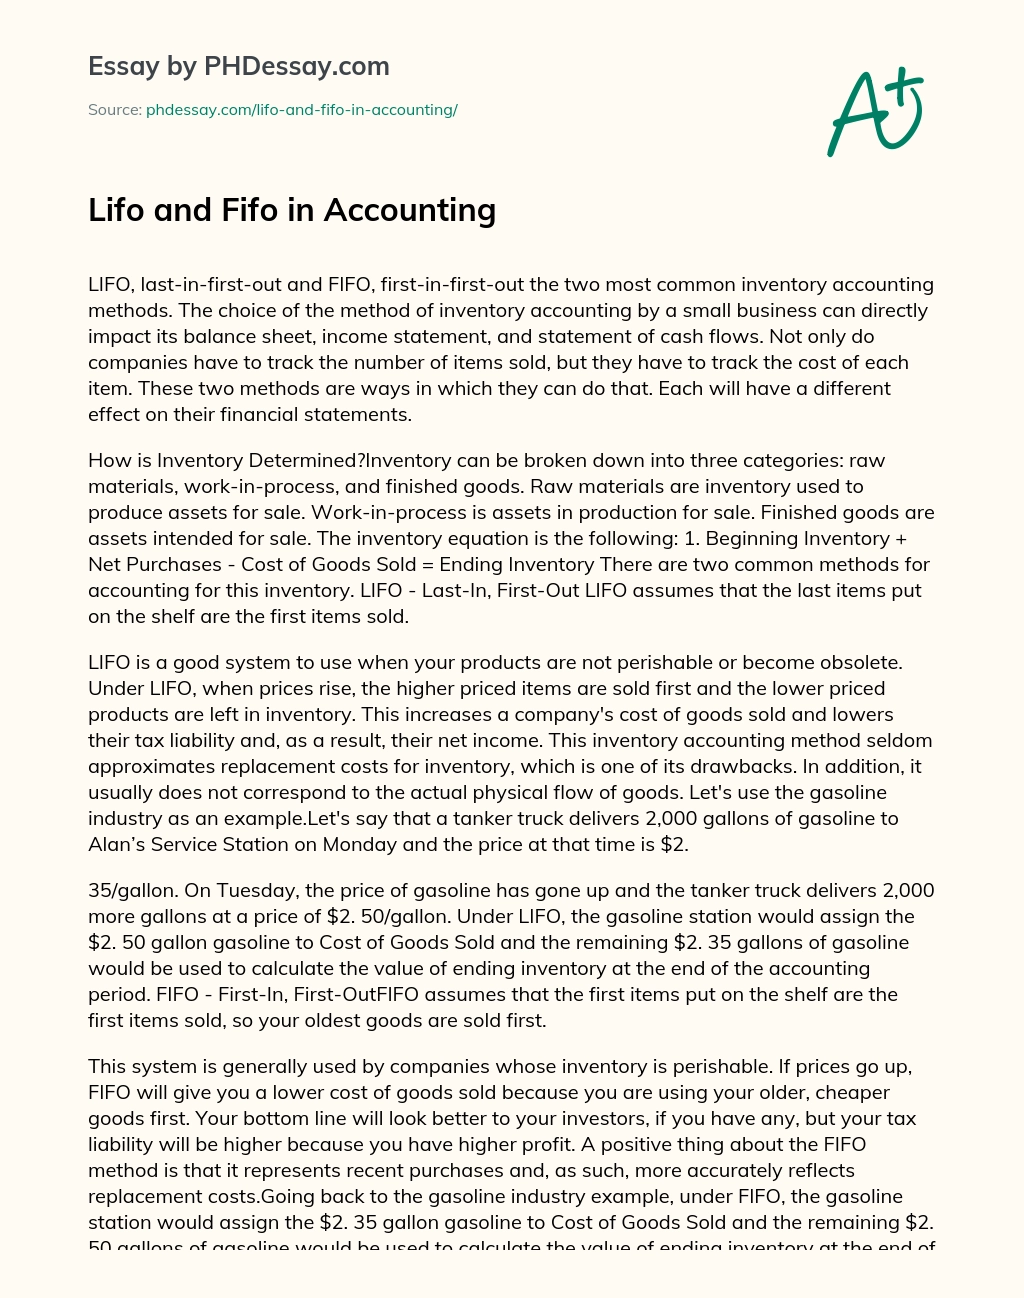 Lifo and Fifo in Accounting essay